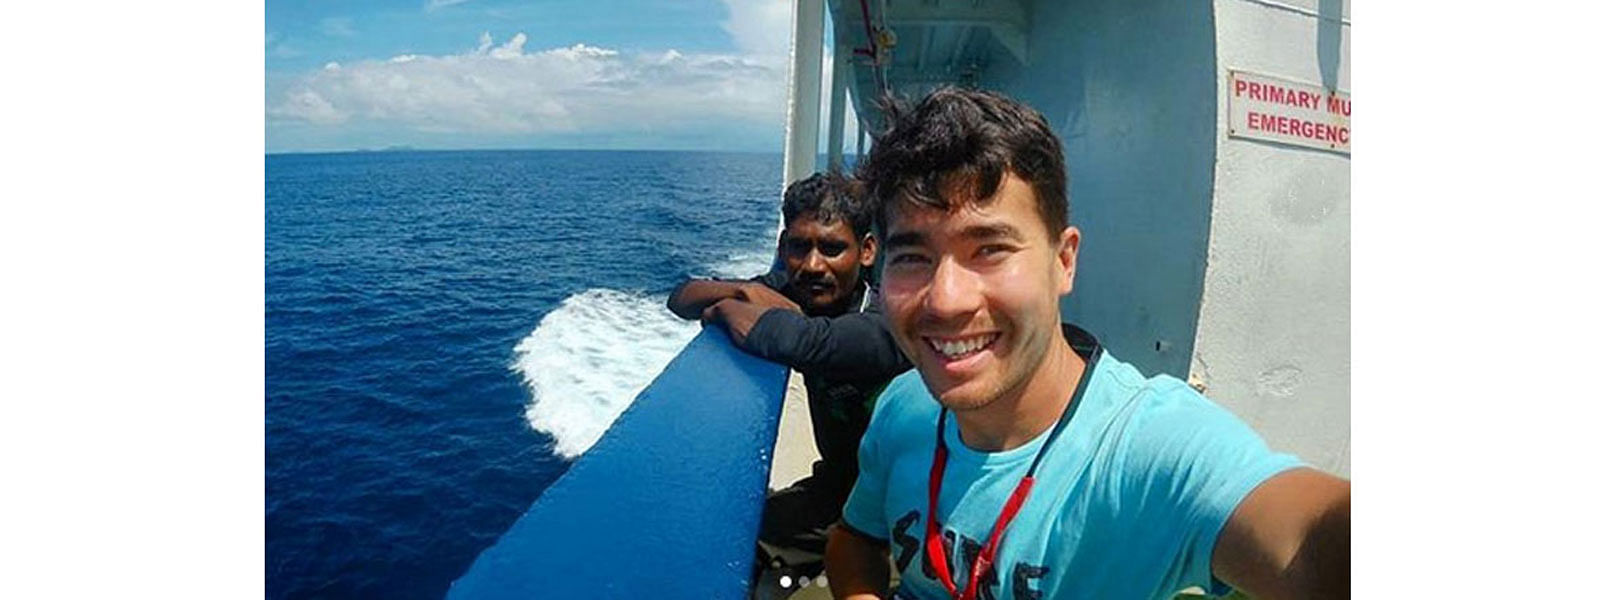 On 21 October, John Allen Chau posted that he was travelling to the region. Credit: Instagram/@johnachau